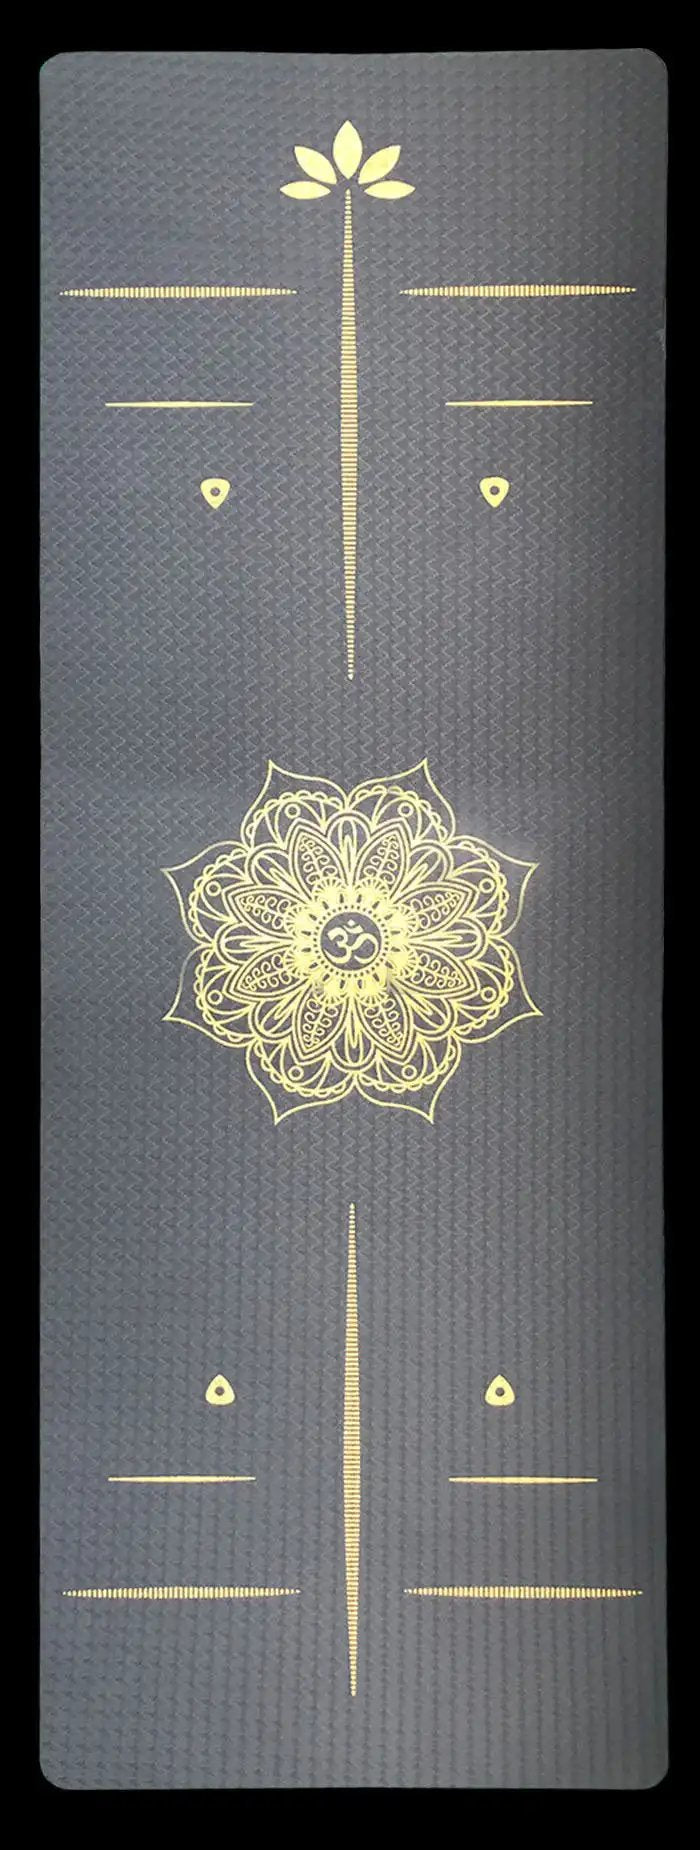 WILKYs0Yoga mat
 
 Weight: 900 (g)
 
 Thickness: 6 (mm)
 
 Product Category: Yoga Mat
 
 Specification: 185*62*0.6 (cm)
 
 Color: white, red, black
 
 
 
 

window.adminAccountId=2